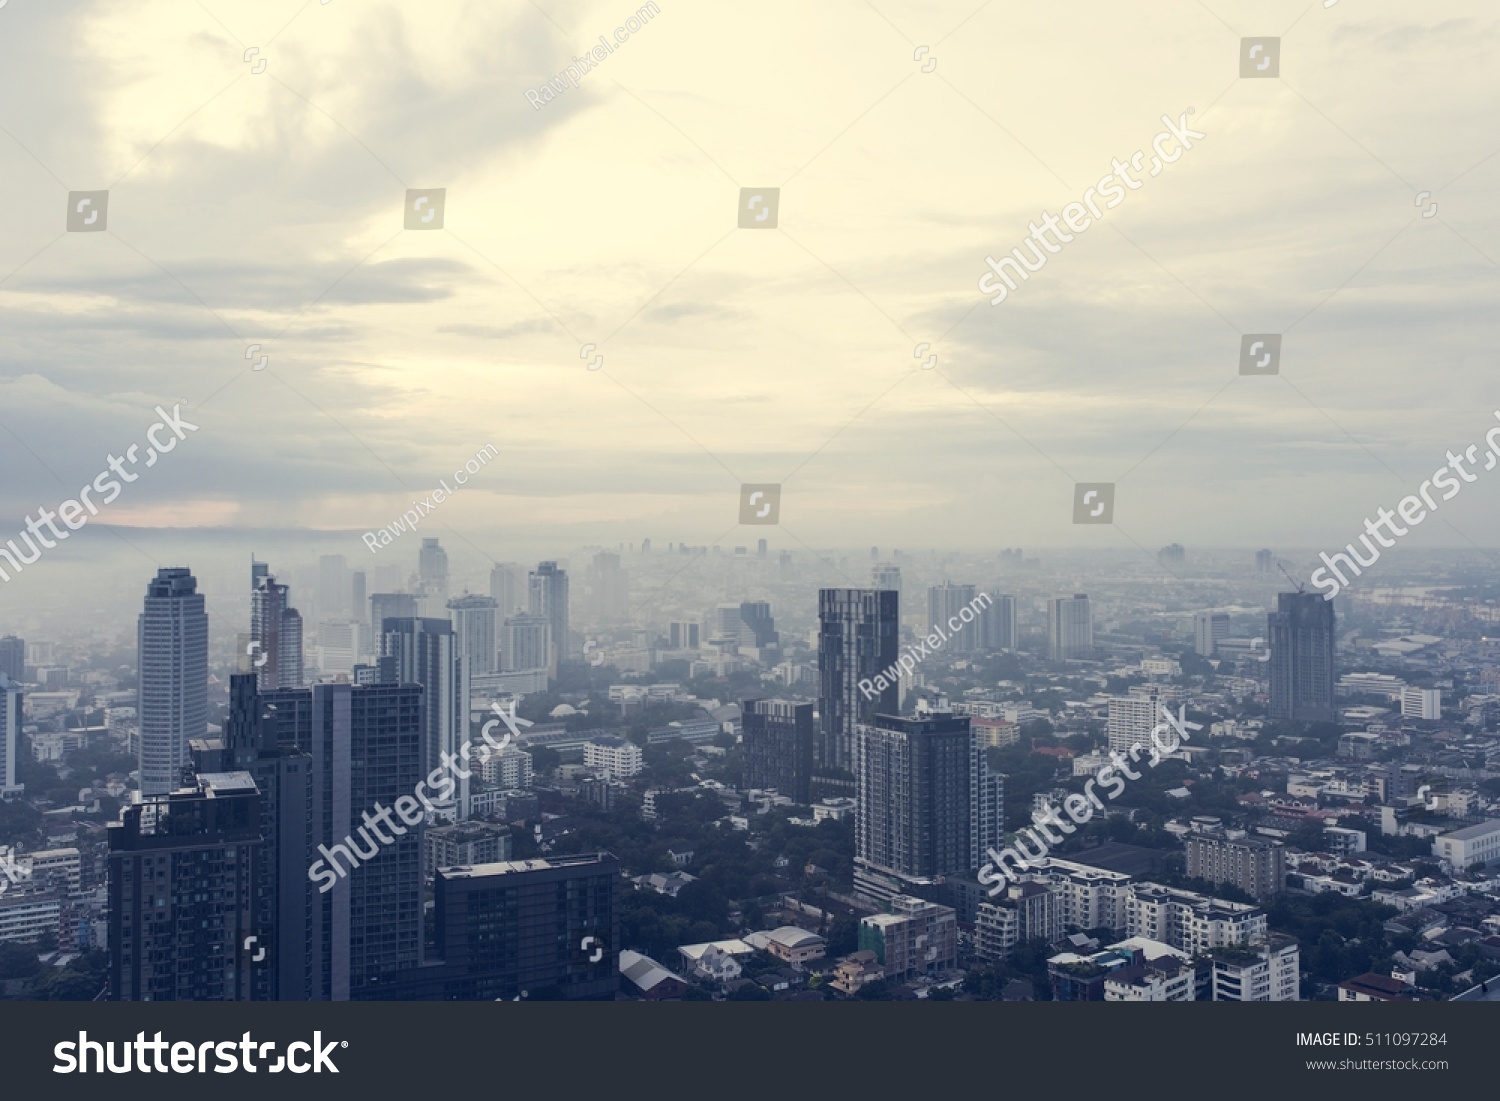 City View Sunset Sky Concept #511097284